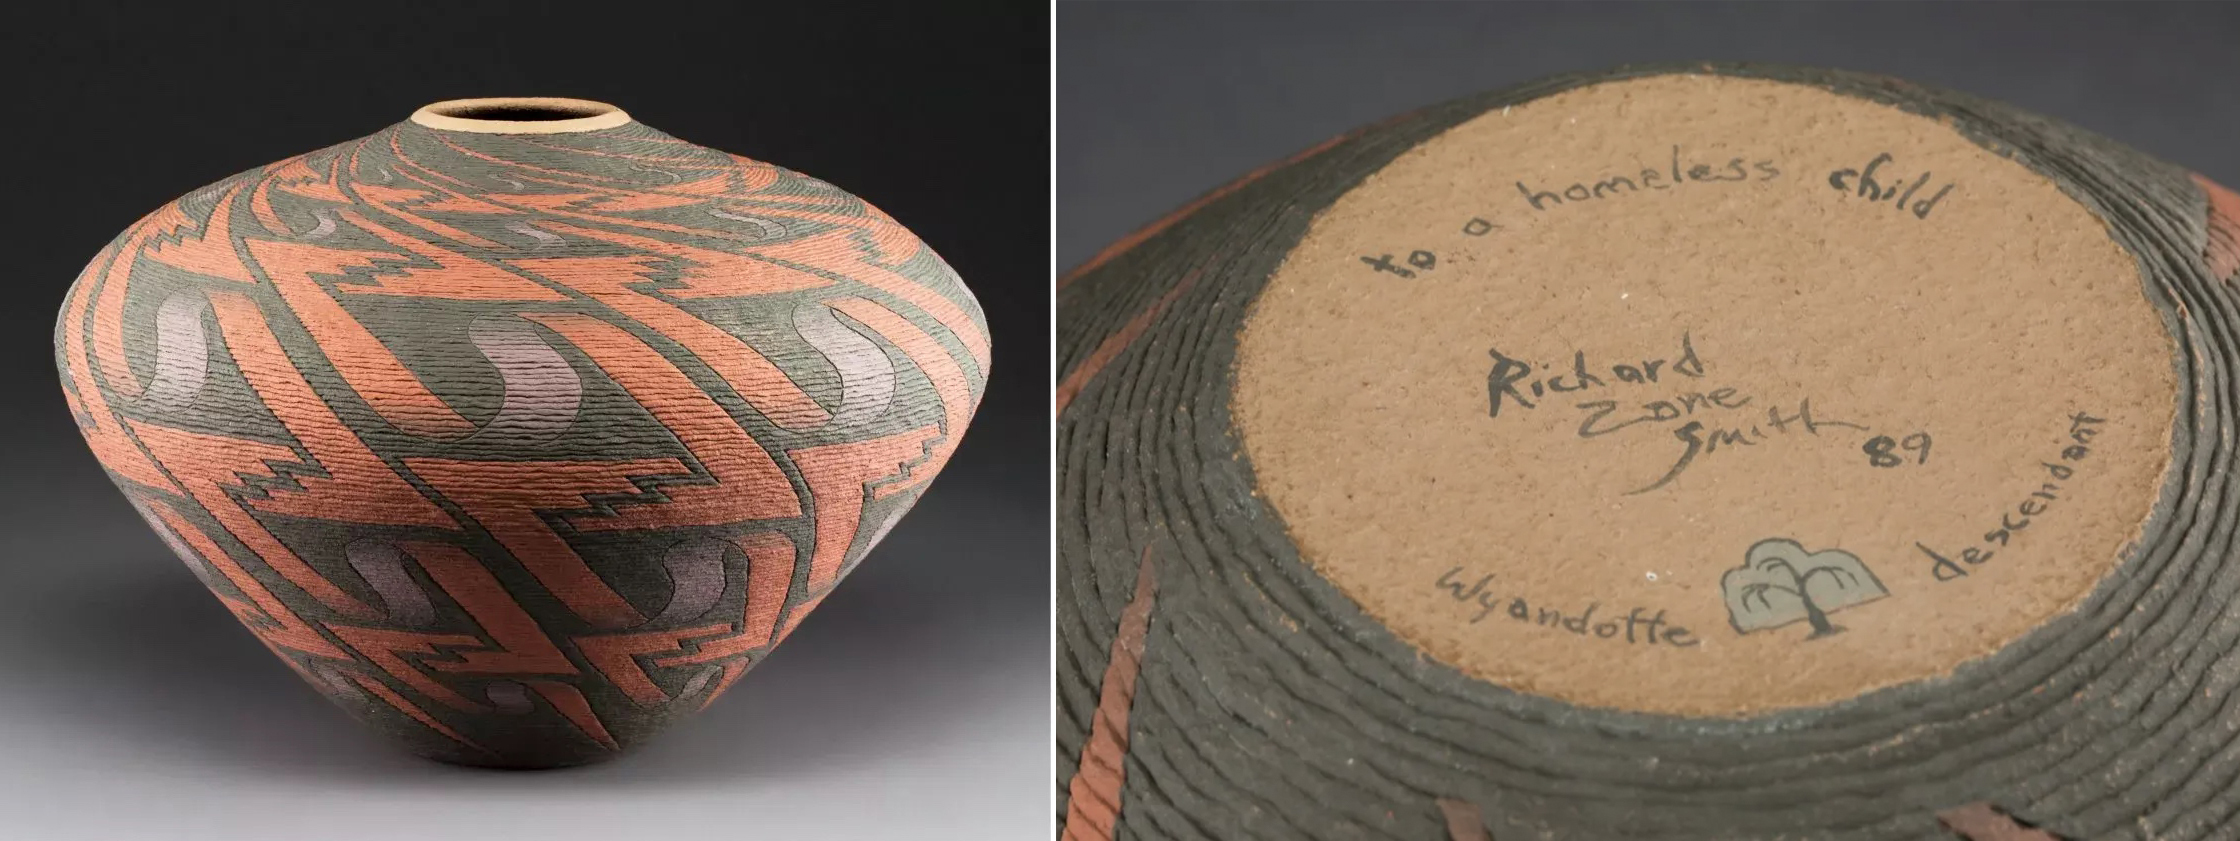 The base of this Richard Zane Smith polychrome jar features a powerful inscription in which the artist comments on social issues. The piece made $3,400 plus the buyer’s premium in June 2018. Image courtesy of Heritage Auctions and LiveAuctioneers.